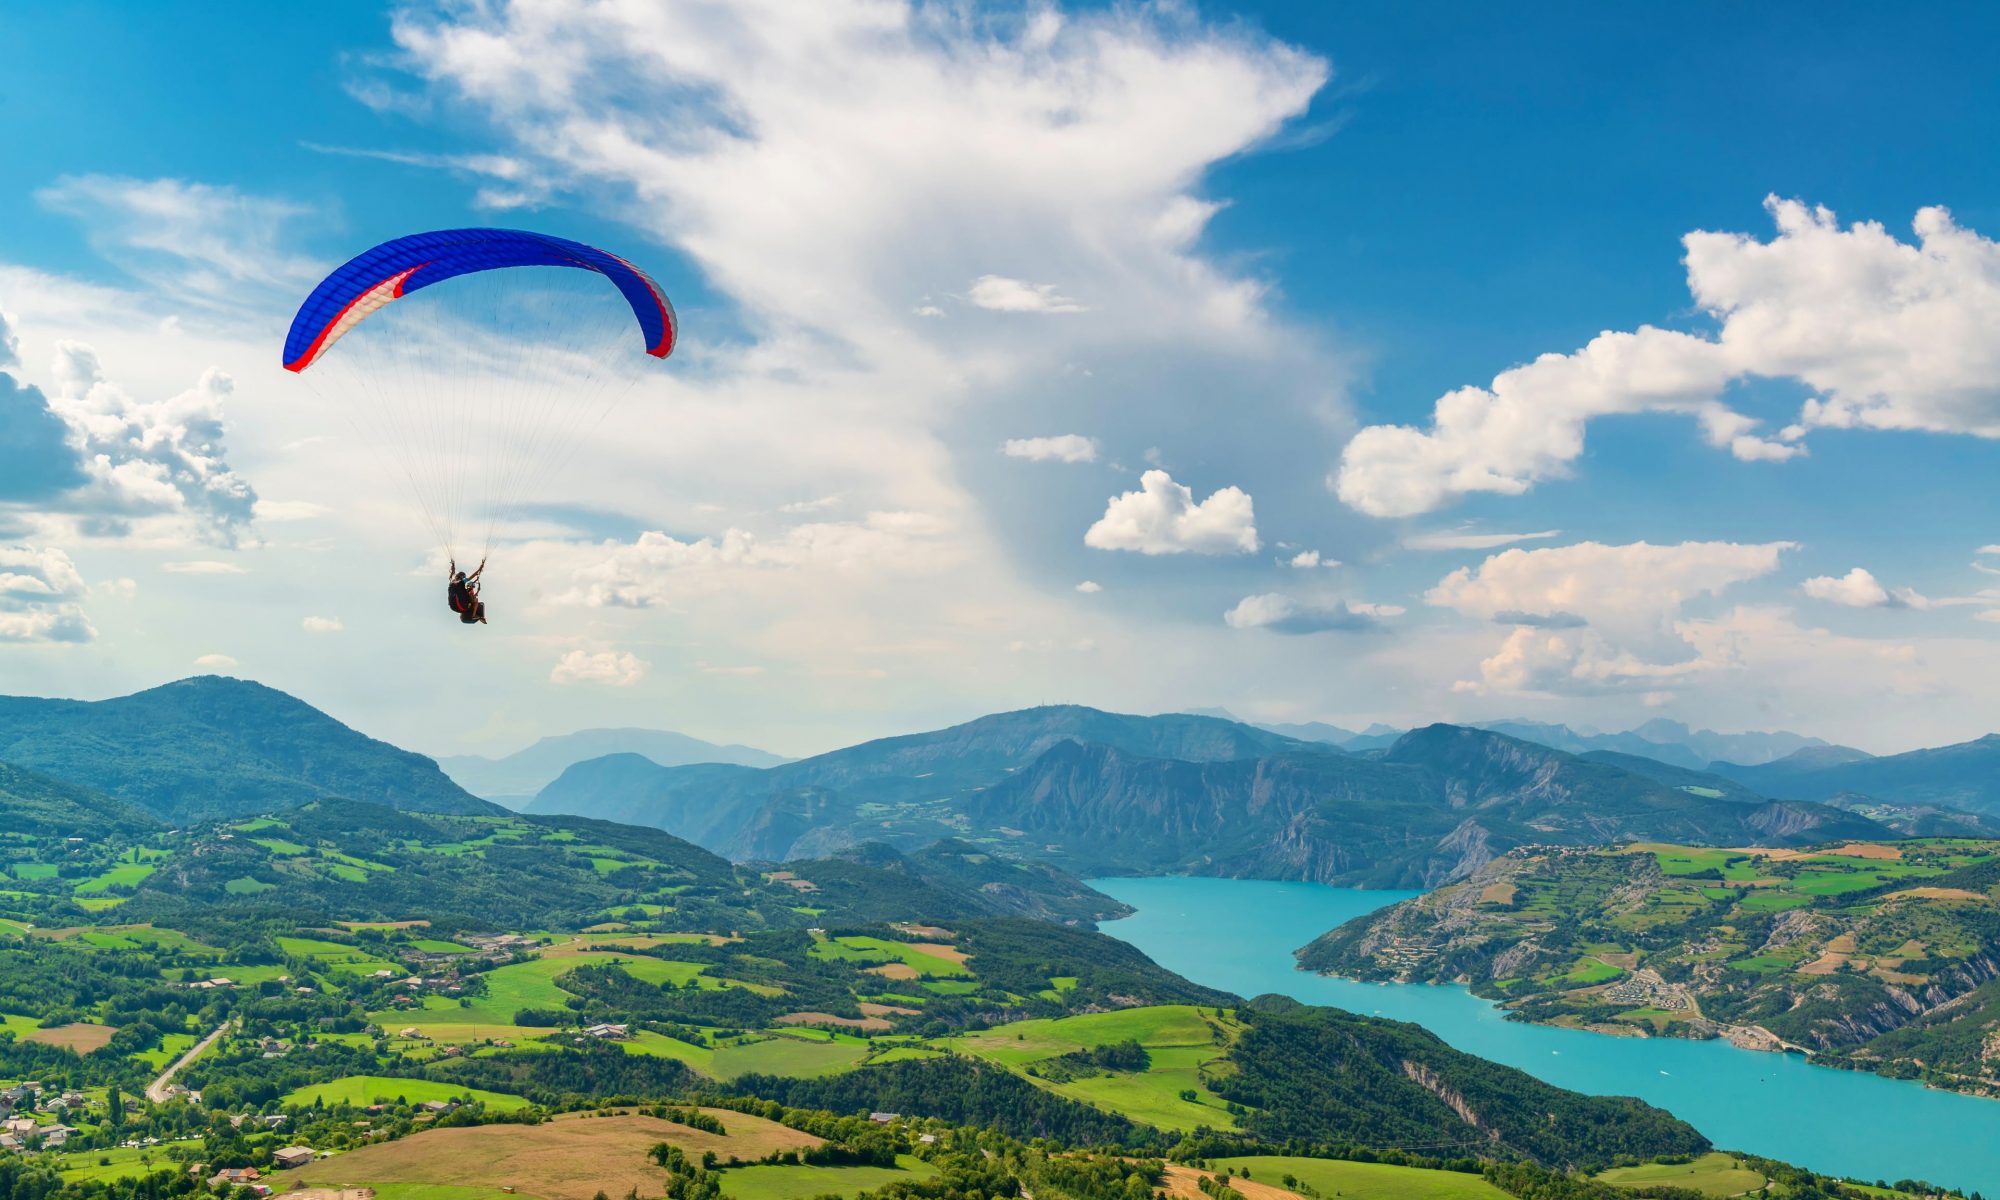 Paragliding in France allows you to explore beautiful places, like Lake Annecy, from a new perspective.